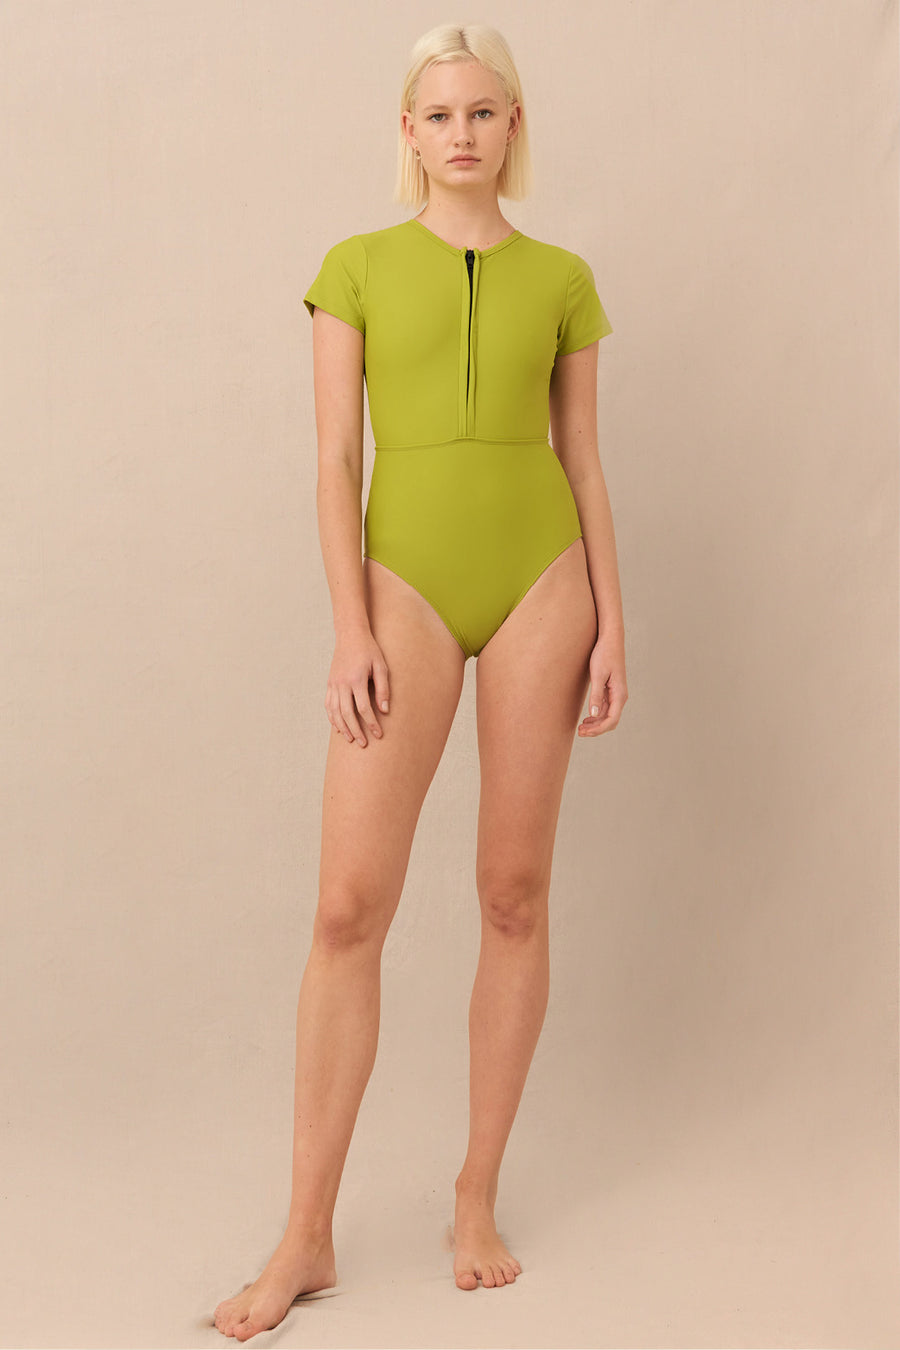 Chacahua Surf Suit | Yucca